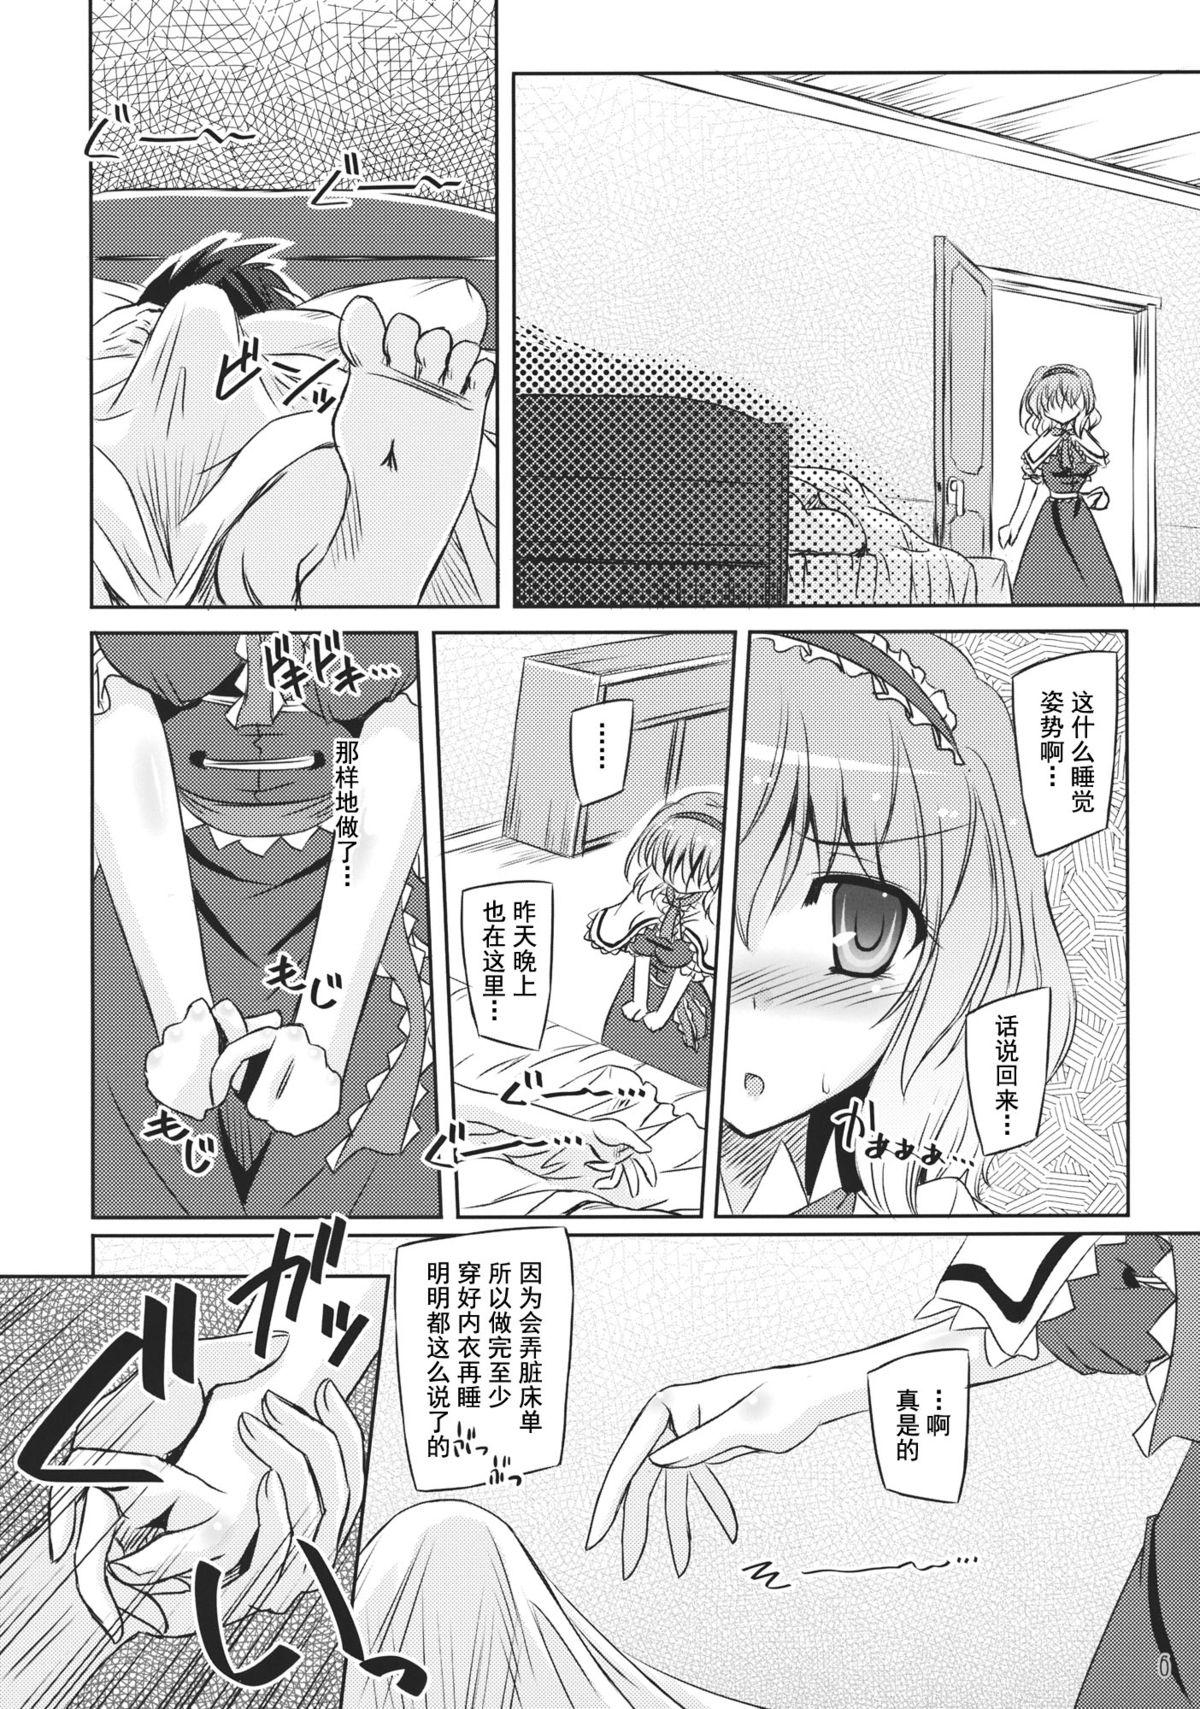 Gaydudes Loose Strings - Touhou project Girl Sucking Dick - Page 6